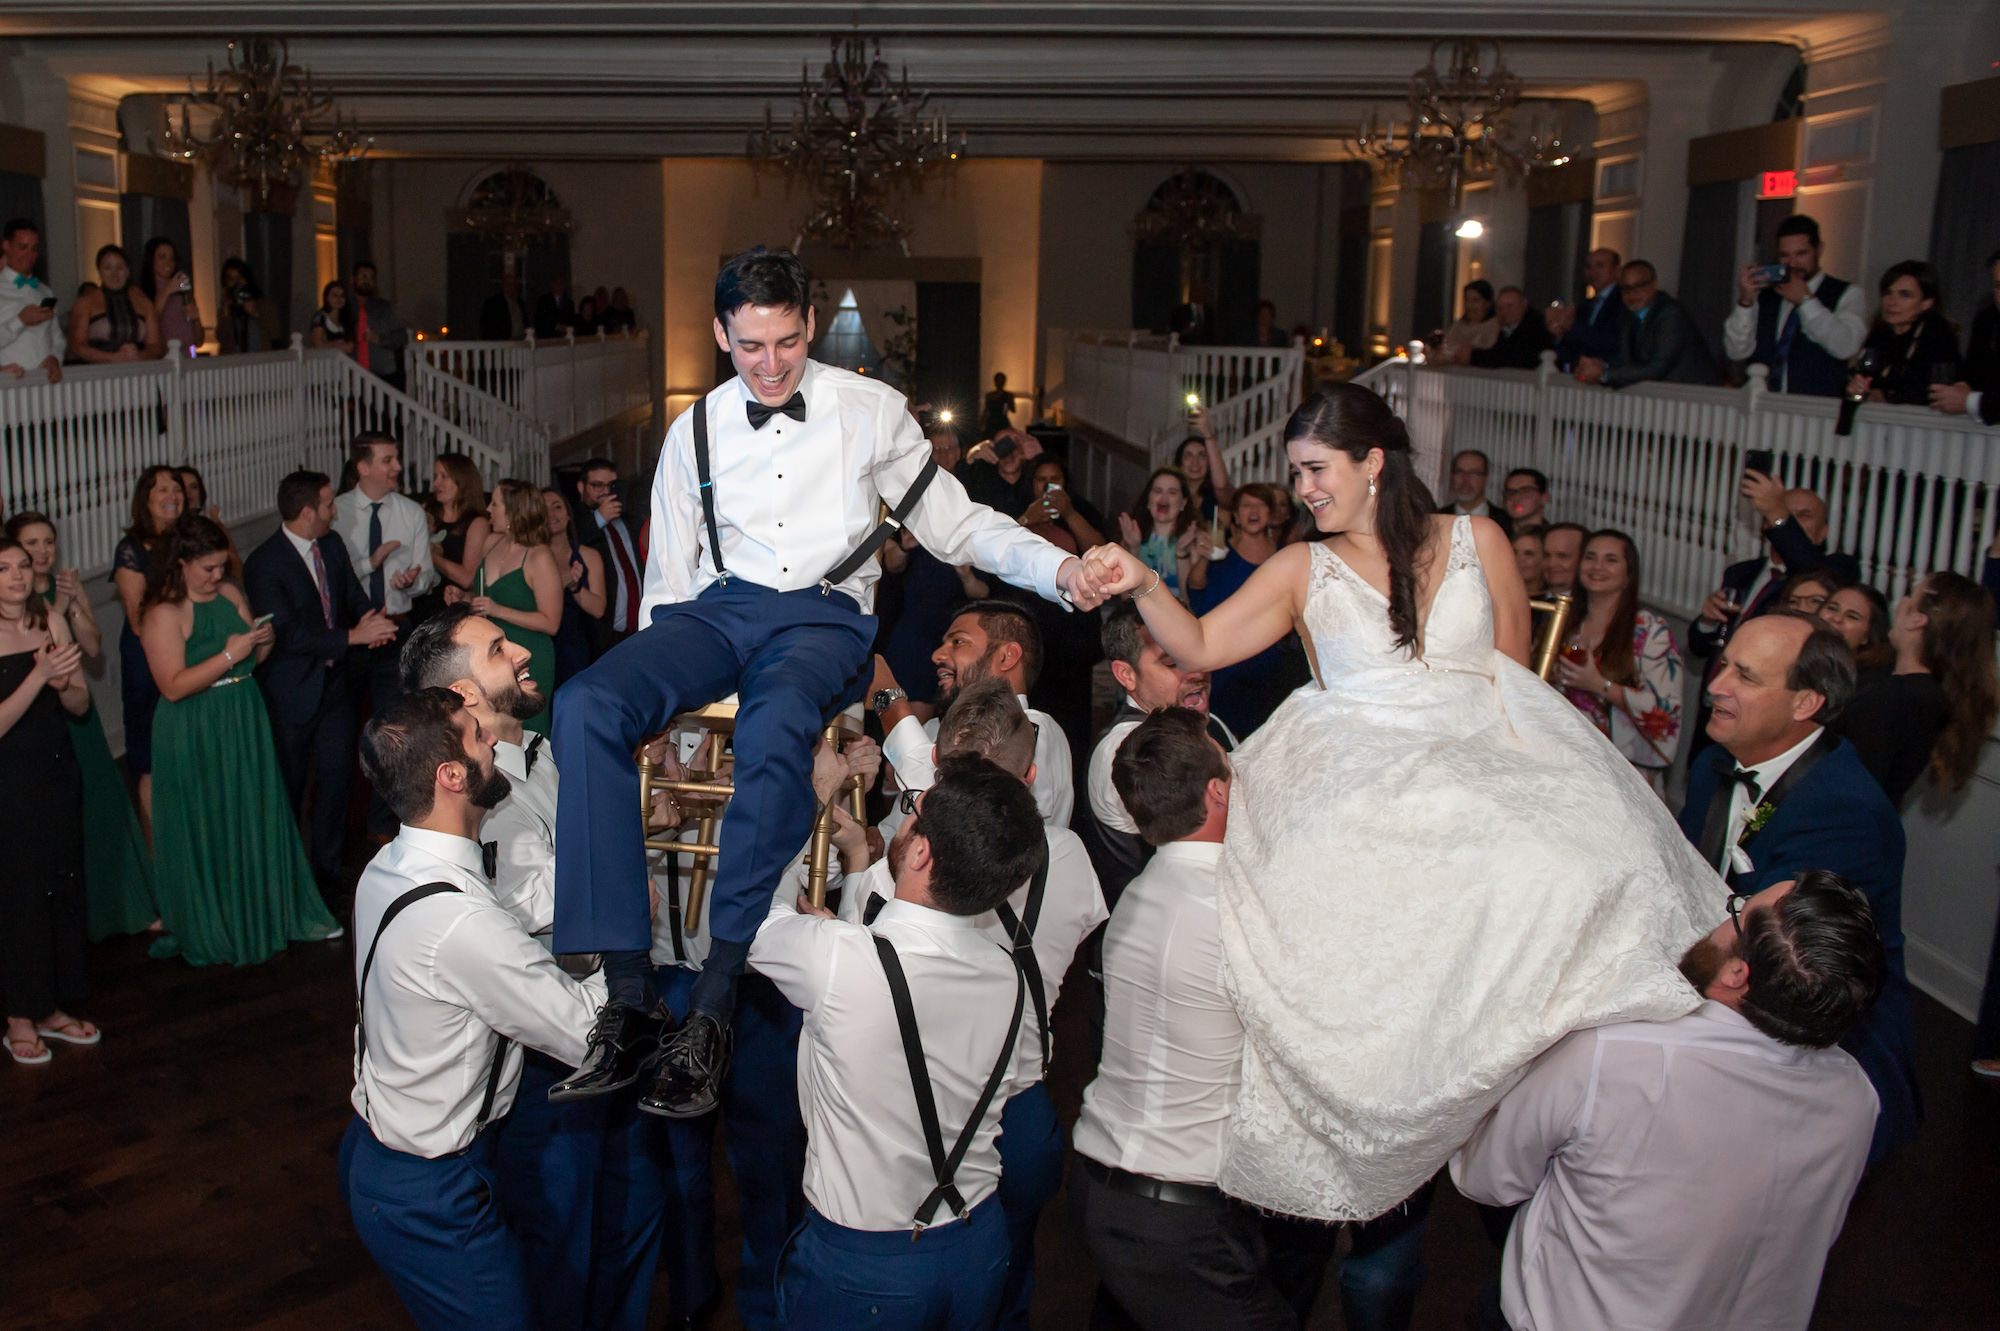 Fun Wedding Guests Lifting Bride and Groom in Chairs During Wedding Reception Dance | St. Petersburg Hotel Wedding Venue The Don CeSar, Historic Pink Palace | Jewish Wedding Reception